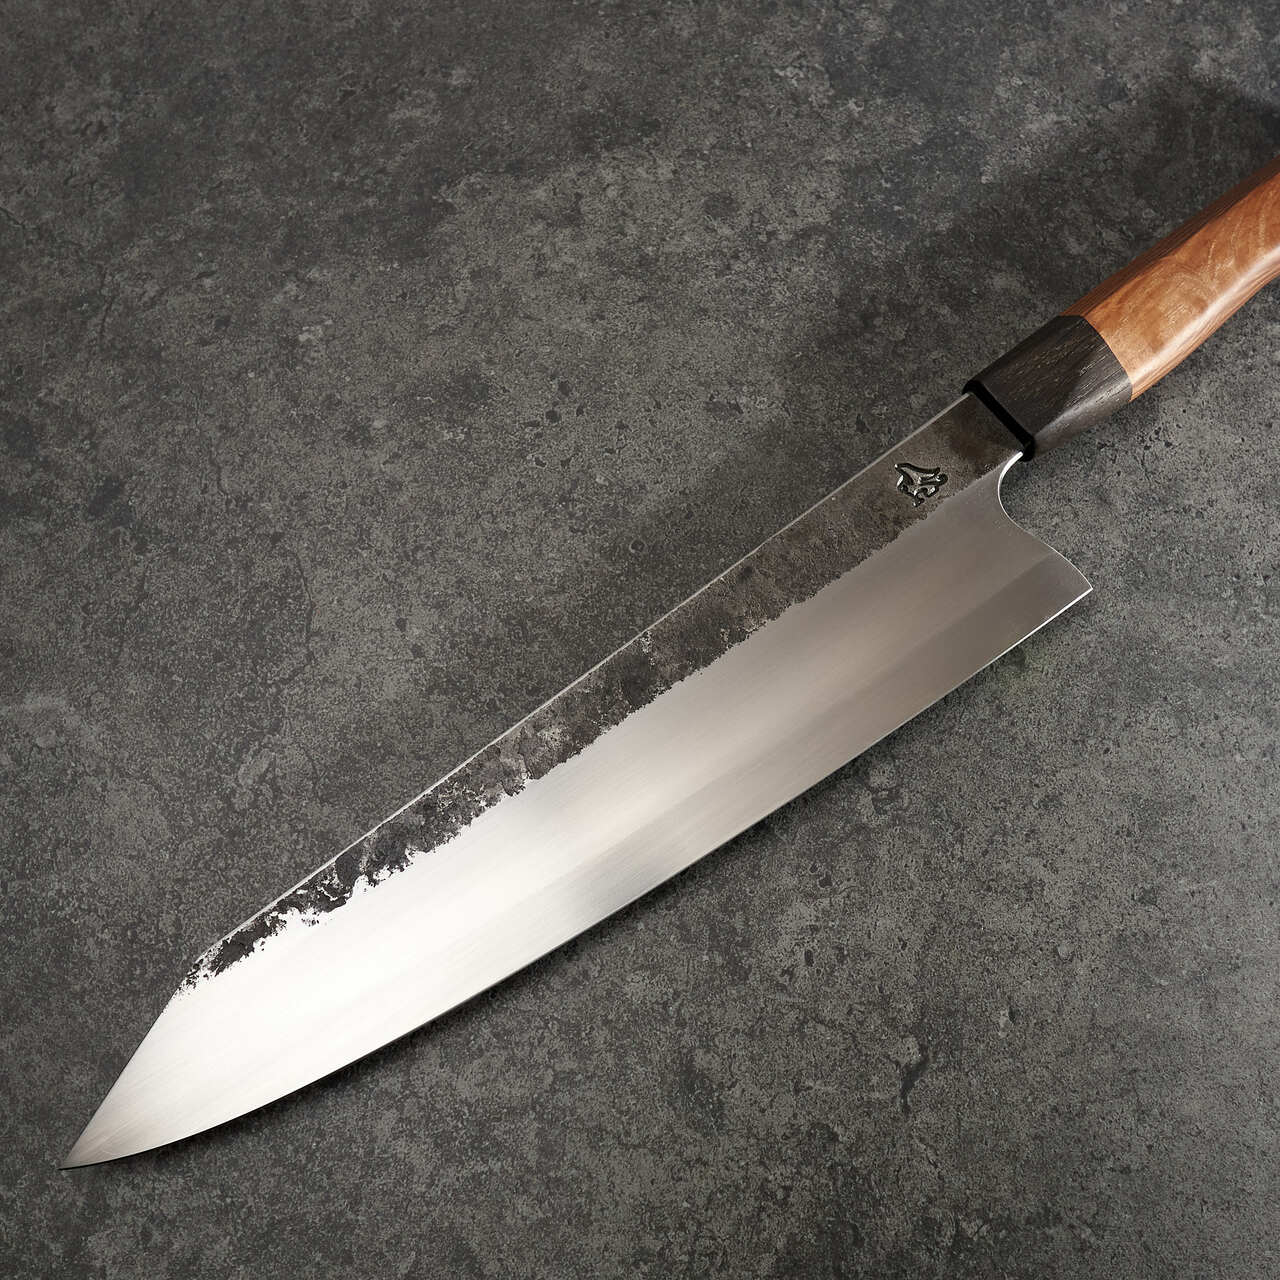 Lew Griffin Gyuto 250mm 52100 Carbon Steel - "S" Grind with Saya - Profile